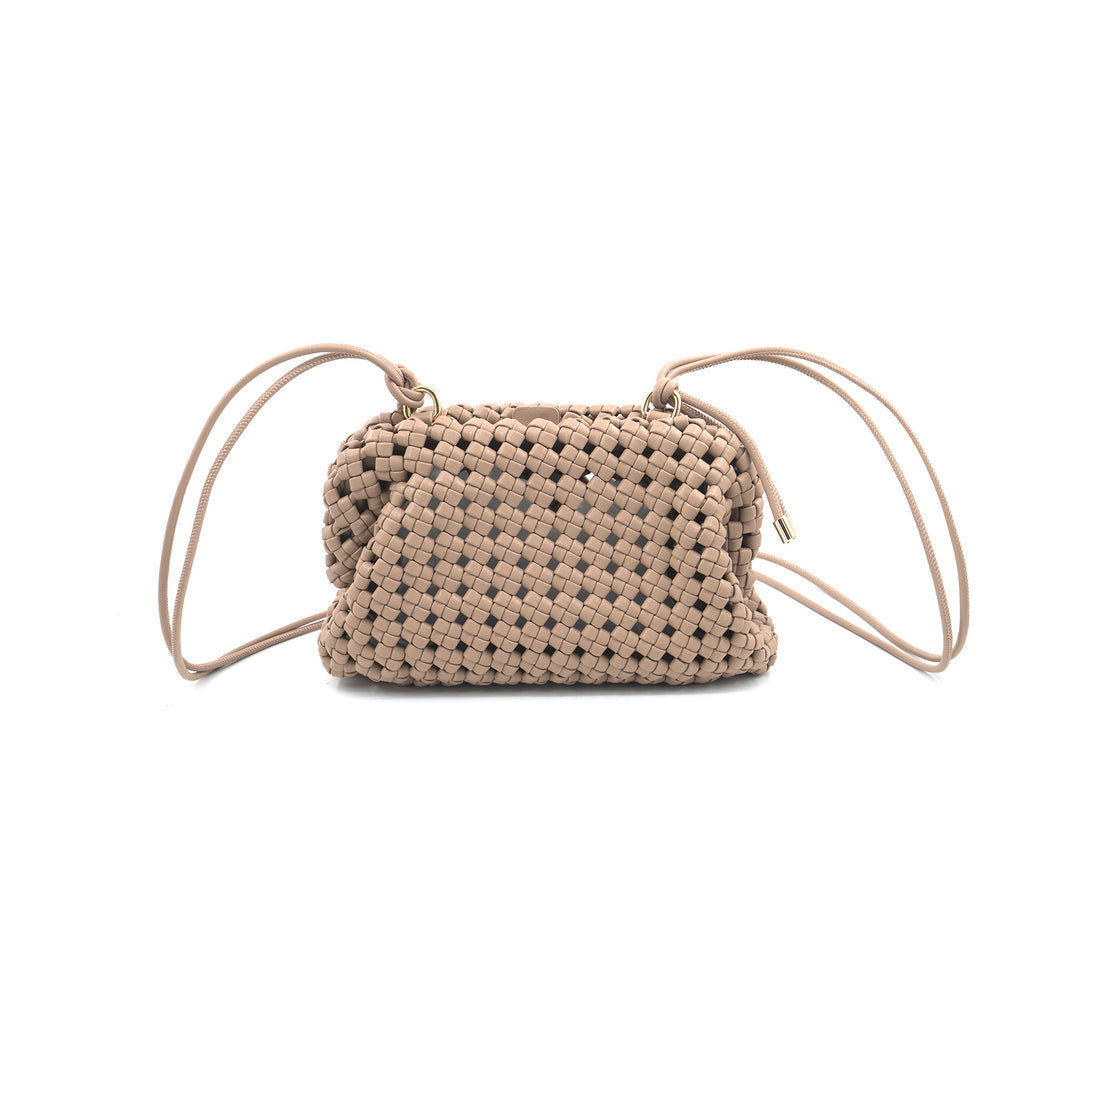 Woven Crossbody Purse in Taupe